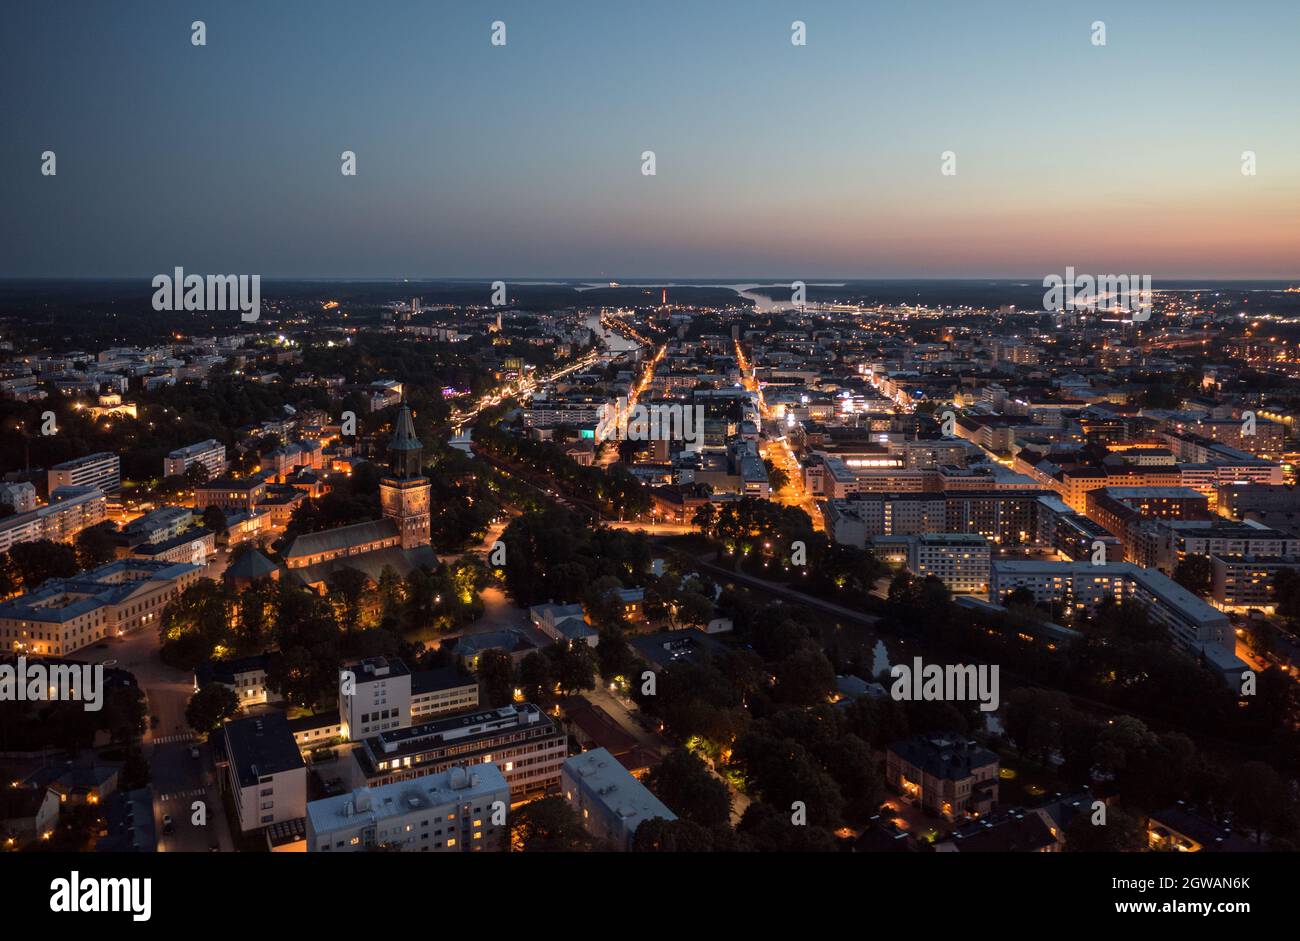 Aerial view of the city center area at night in Turku, Finland Stock Photo